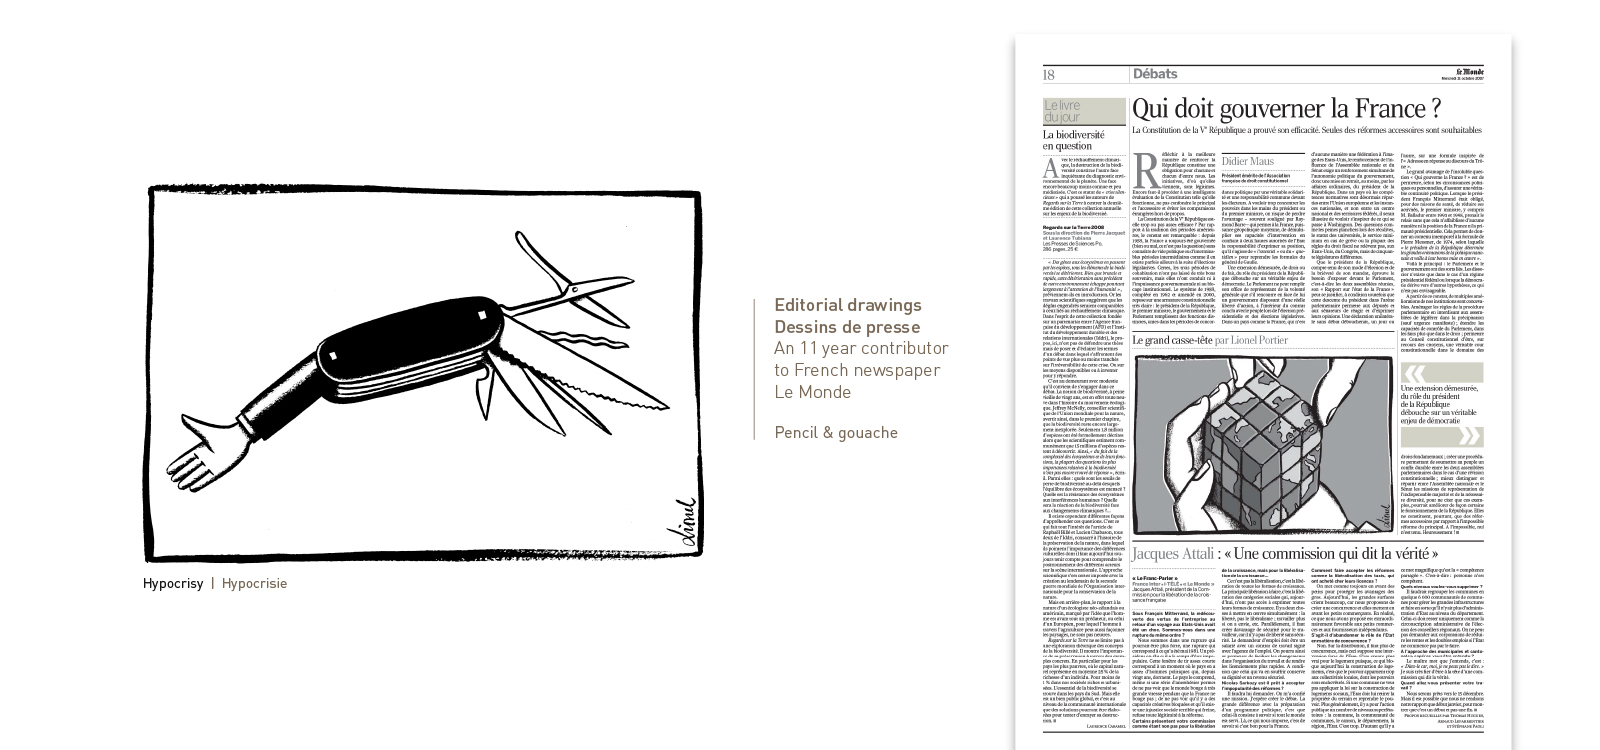 Le Monde editorial drawings by Lionel